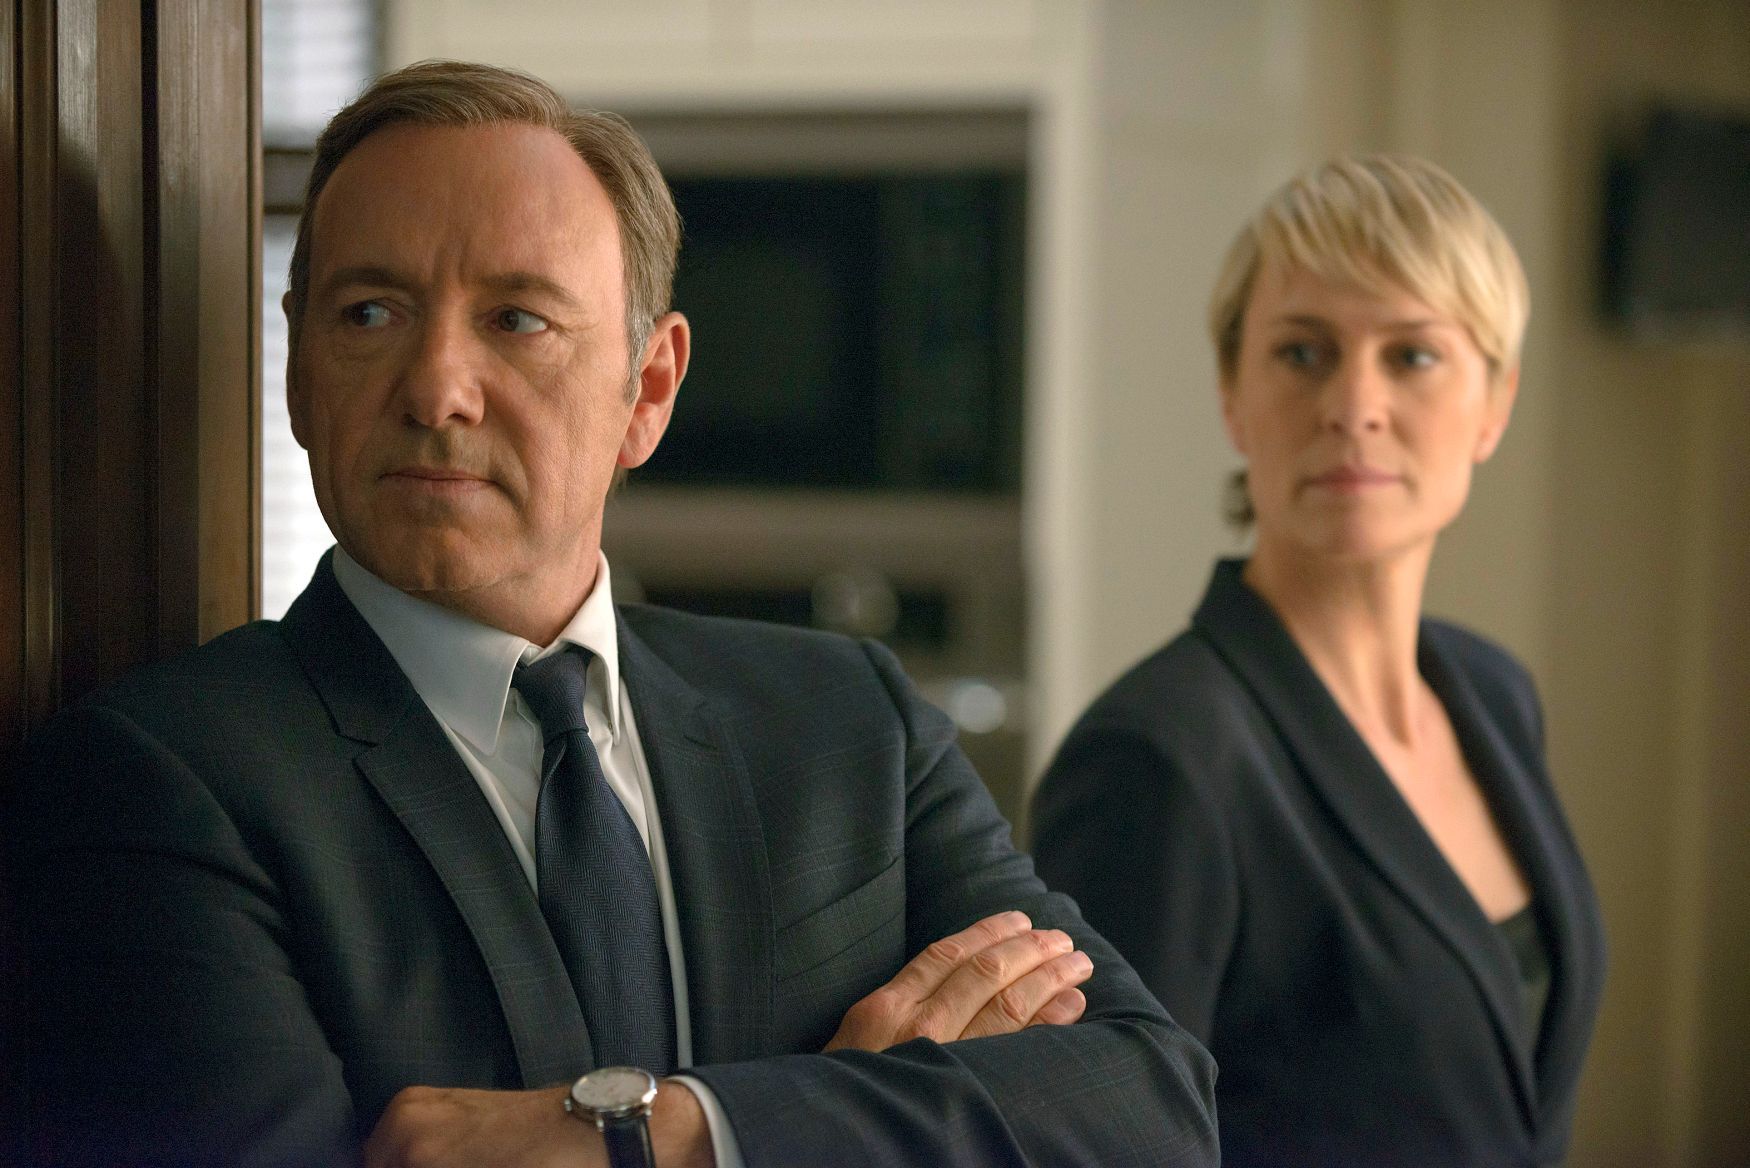 Kevin Spacey Robin Wrightová House of Cards